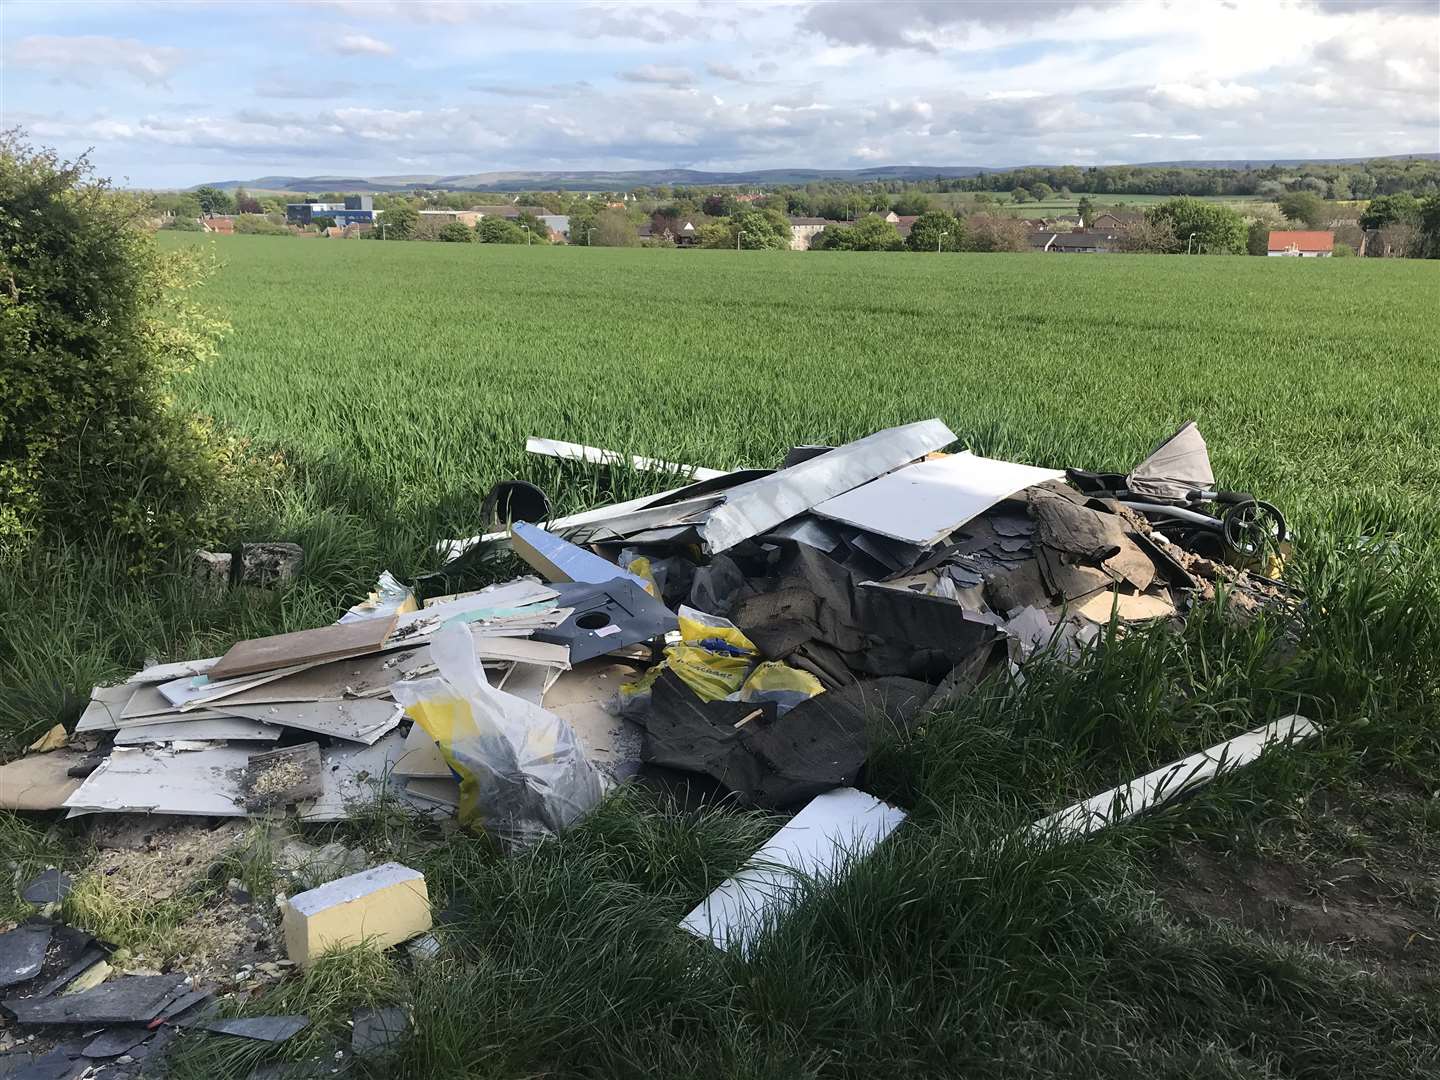 Fly-tipping causes many problems in rural areas.